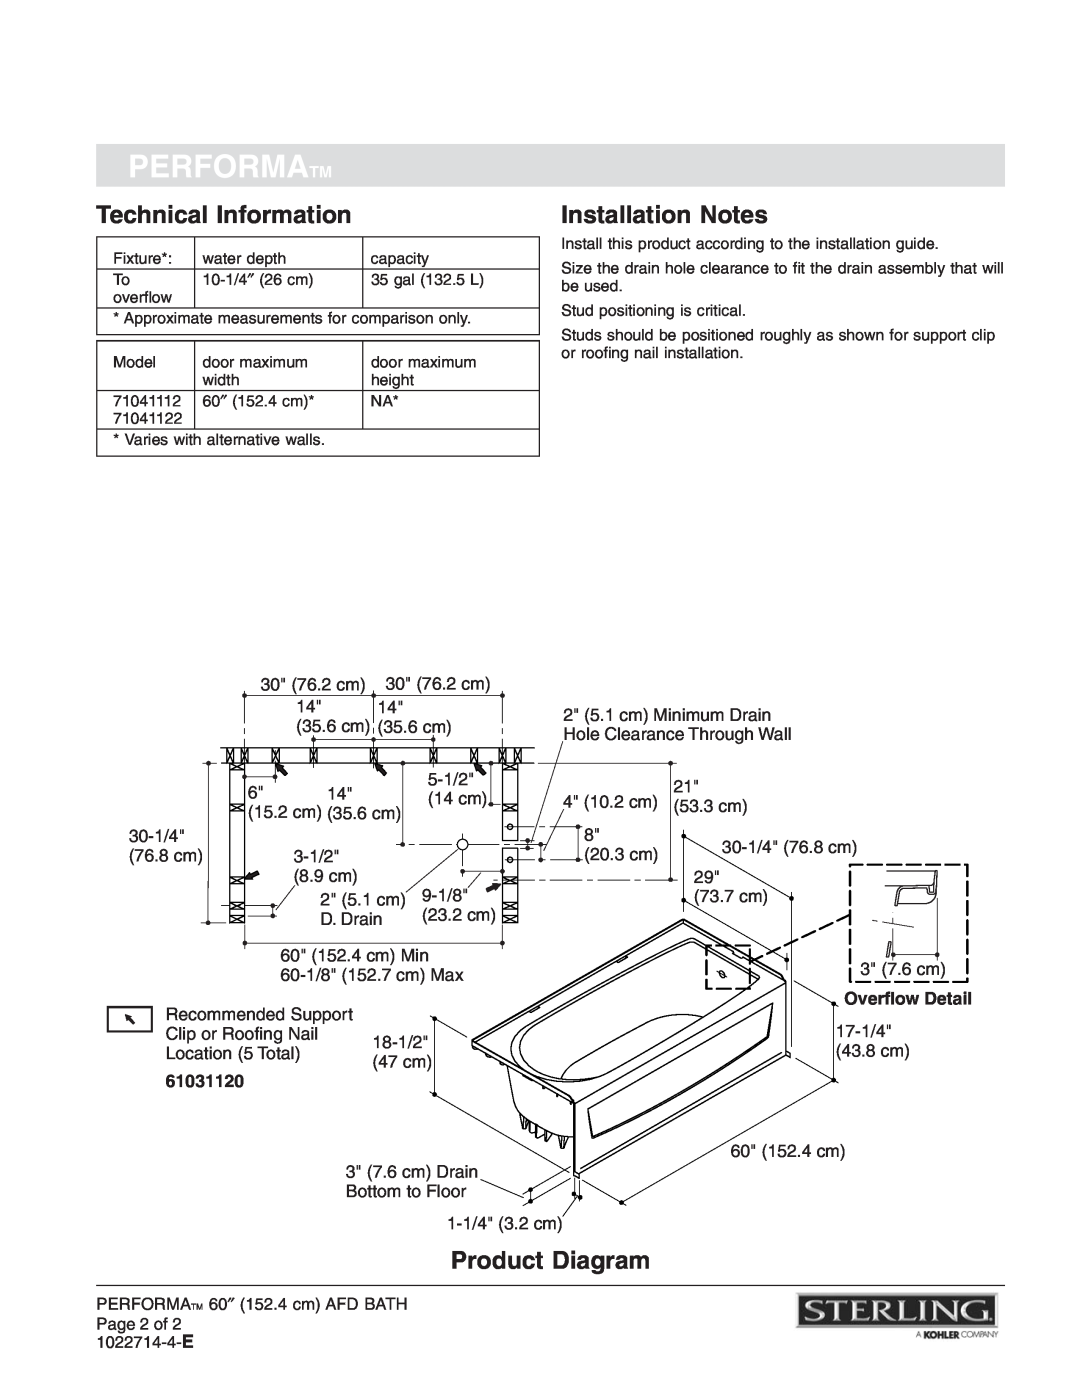 Sterling Plumbing 71041112, 71041122 Technical Information, Installation Notes, Product Diagram, Performatm, 61031120 